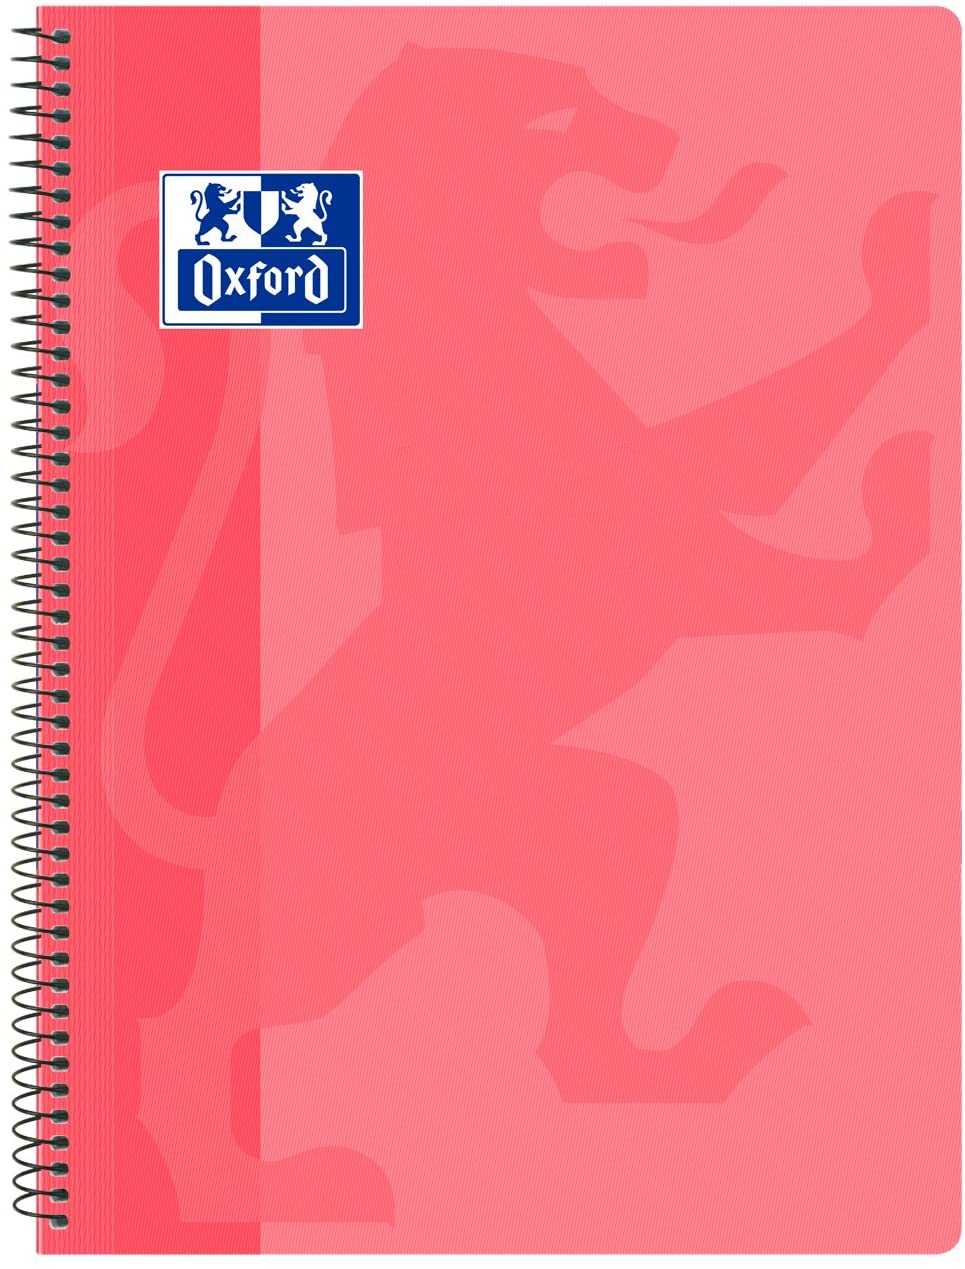 Cuaderno OXFORD School T.PP F 4x4 c/m rosa chicle